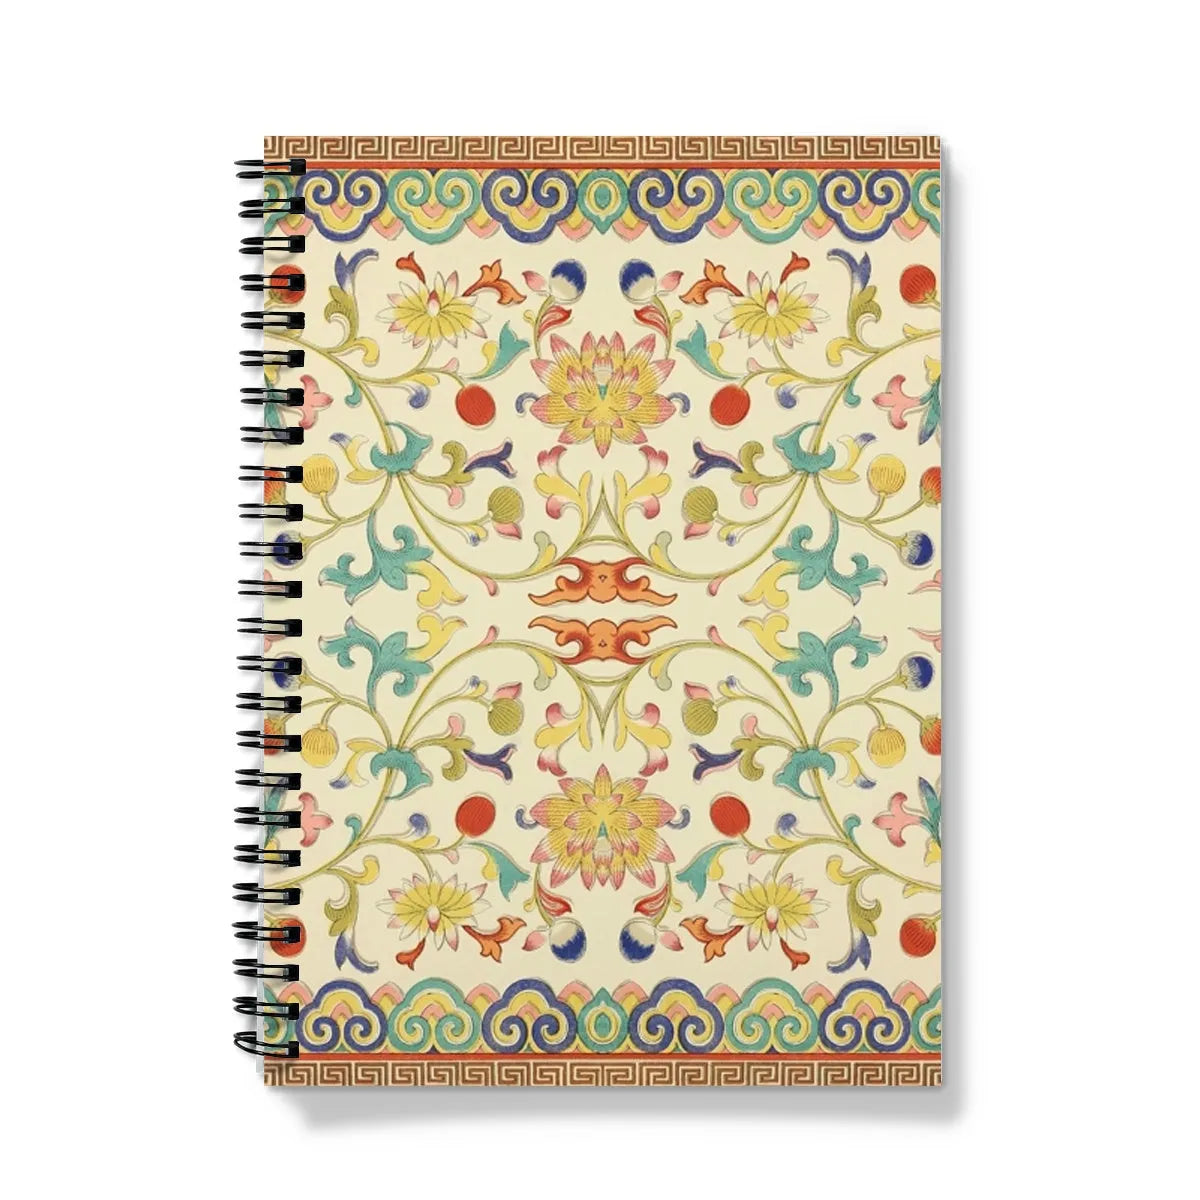 Over The Rainbow Notebook - A5 - Graph Paper - Notebooks & Notepads - Aesthetic Art